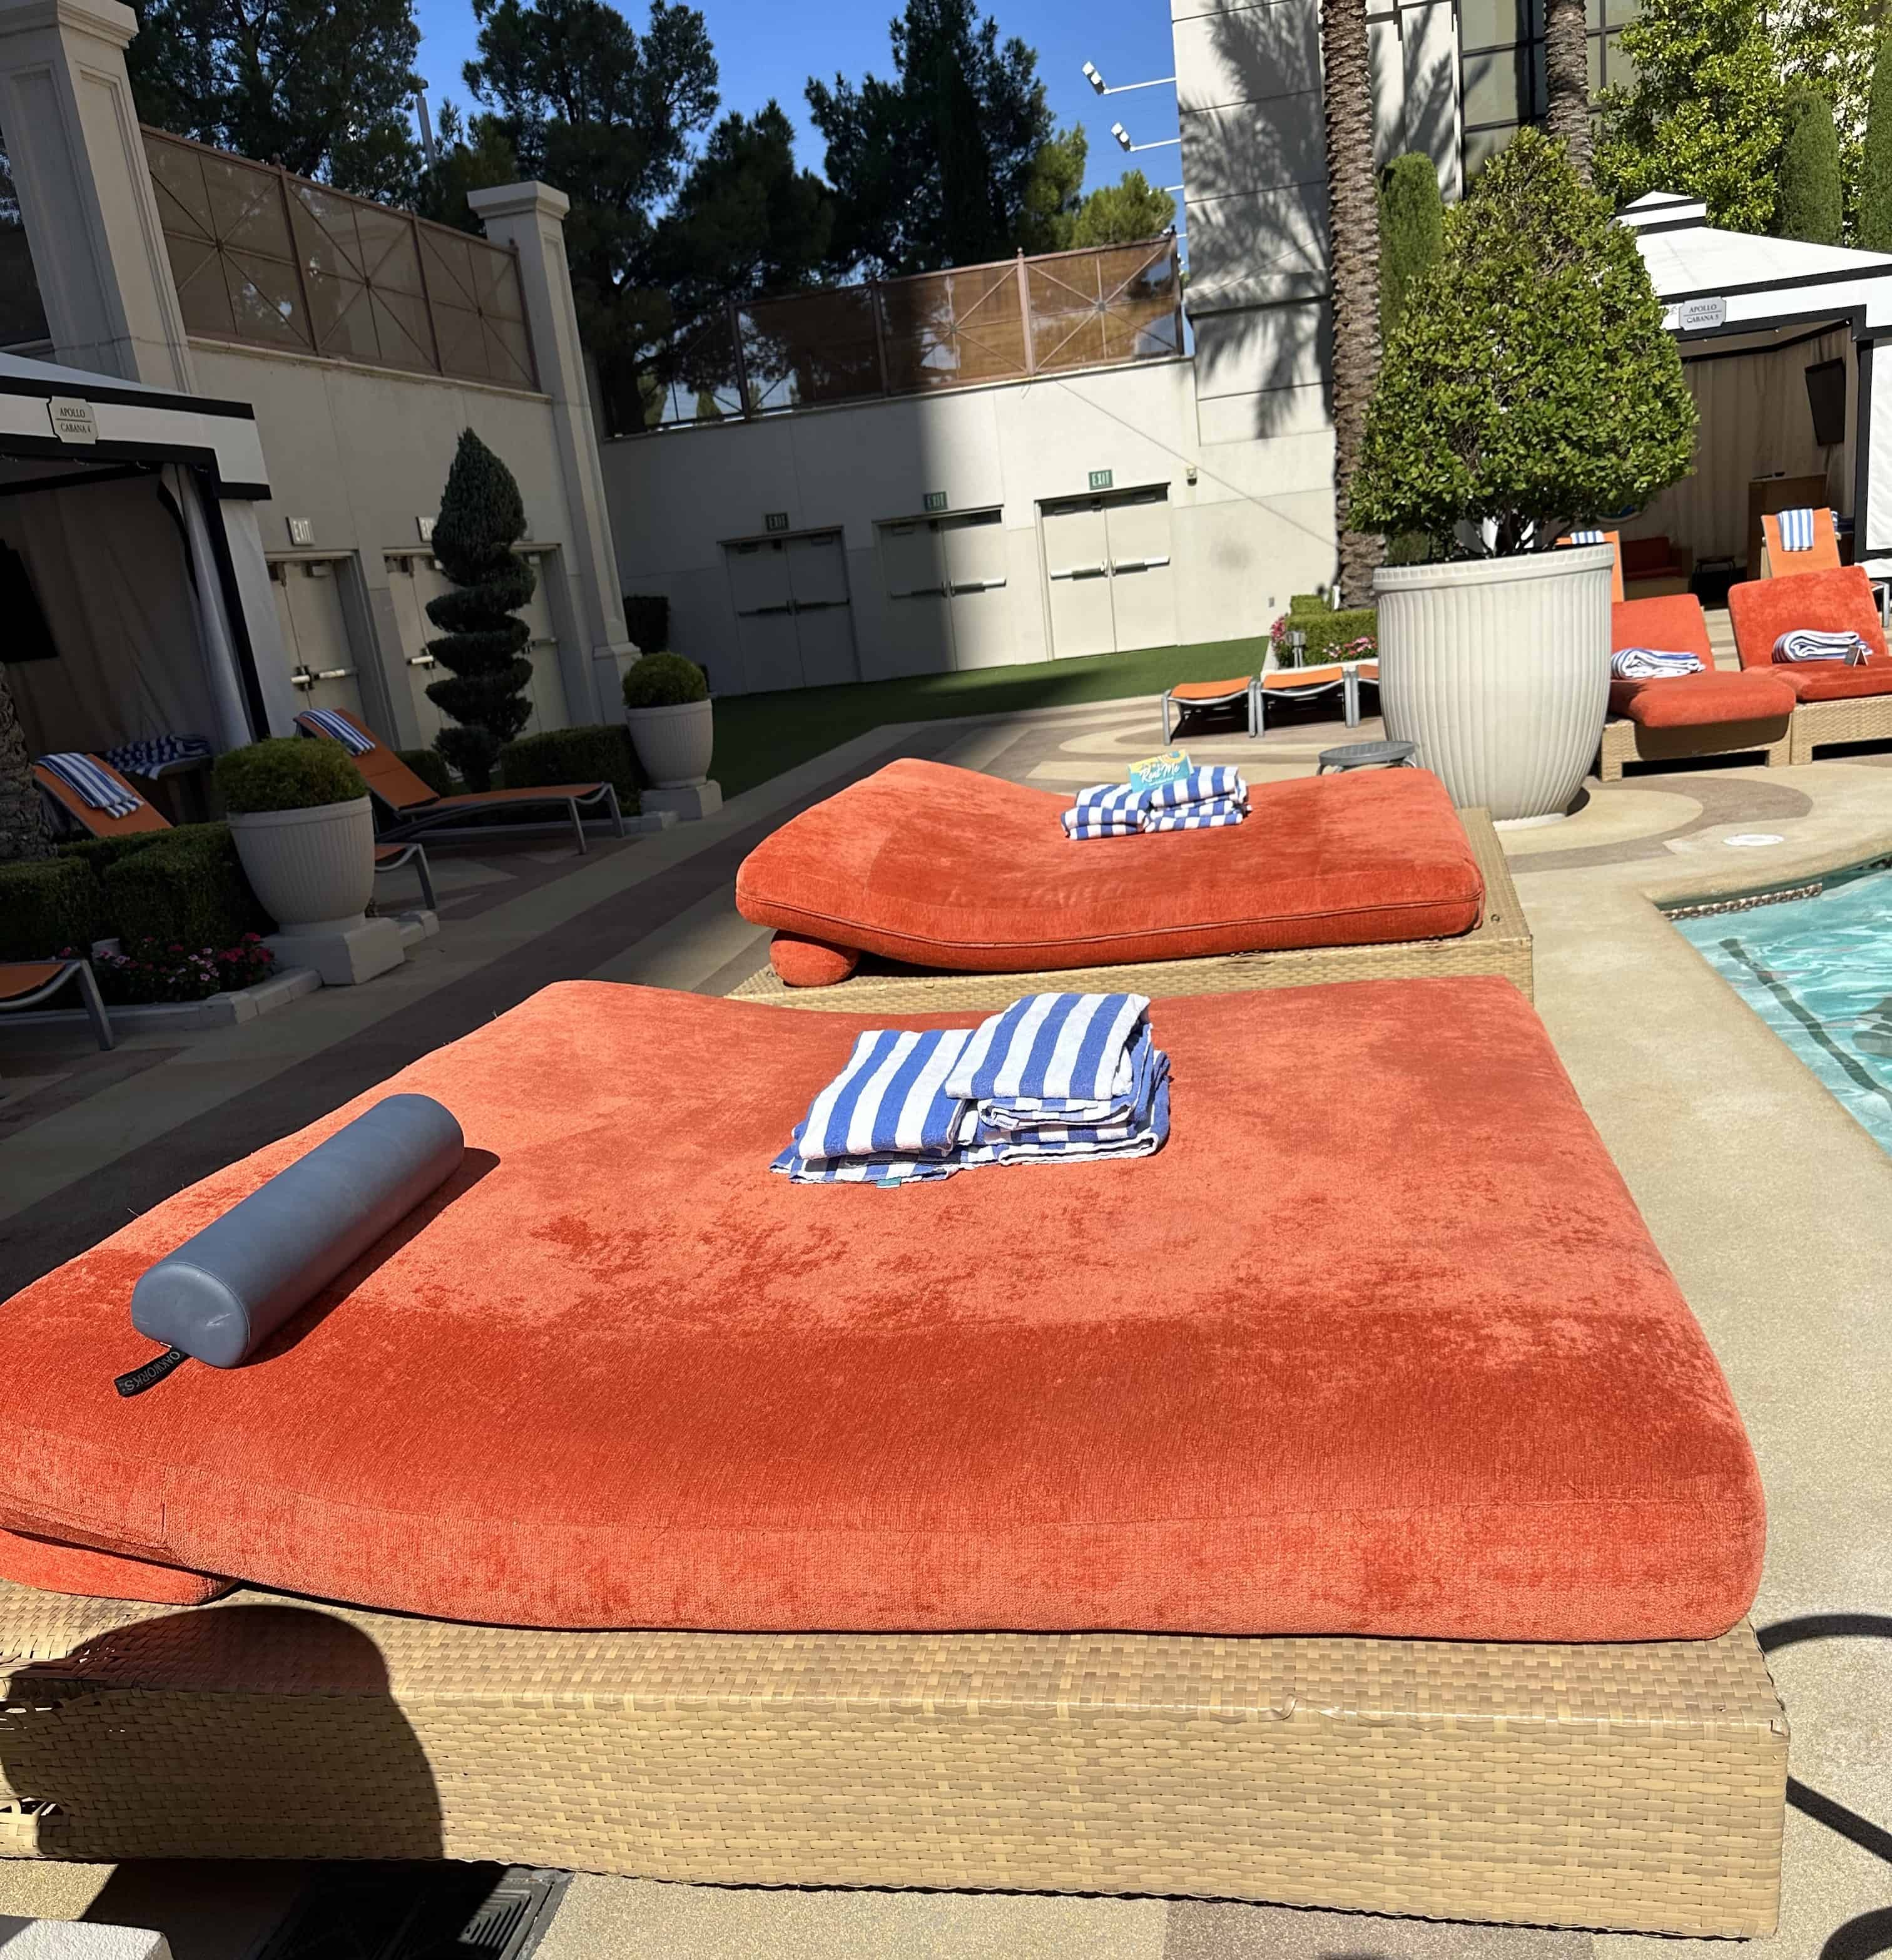 Two bright red daybeds alongside a pool. Striped towels are on both daybeds.